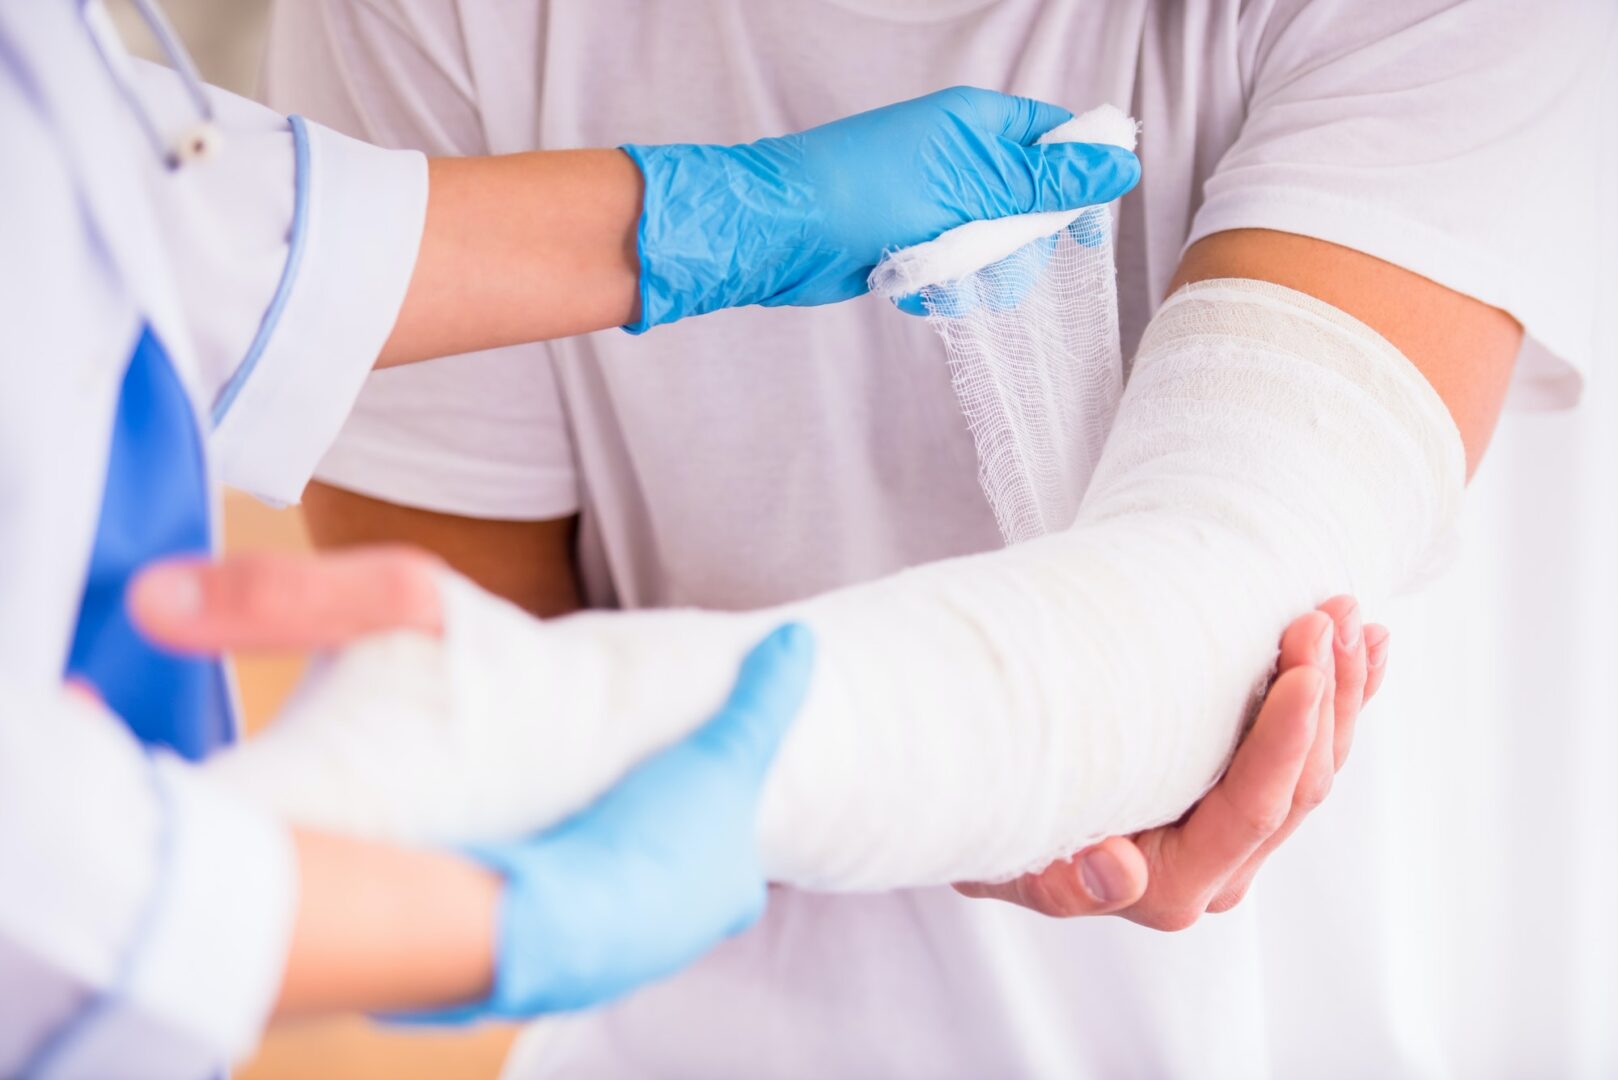 A doctor is treating a personal injury by applying a bandage to a patient's arm.